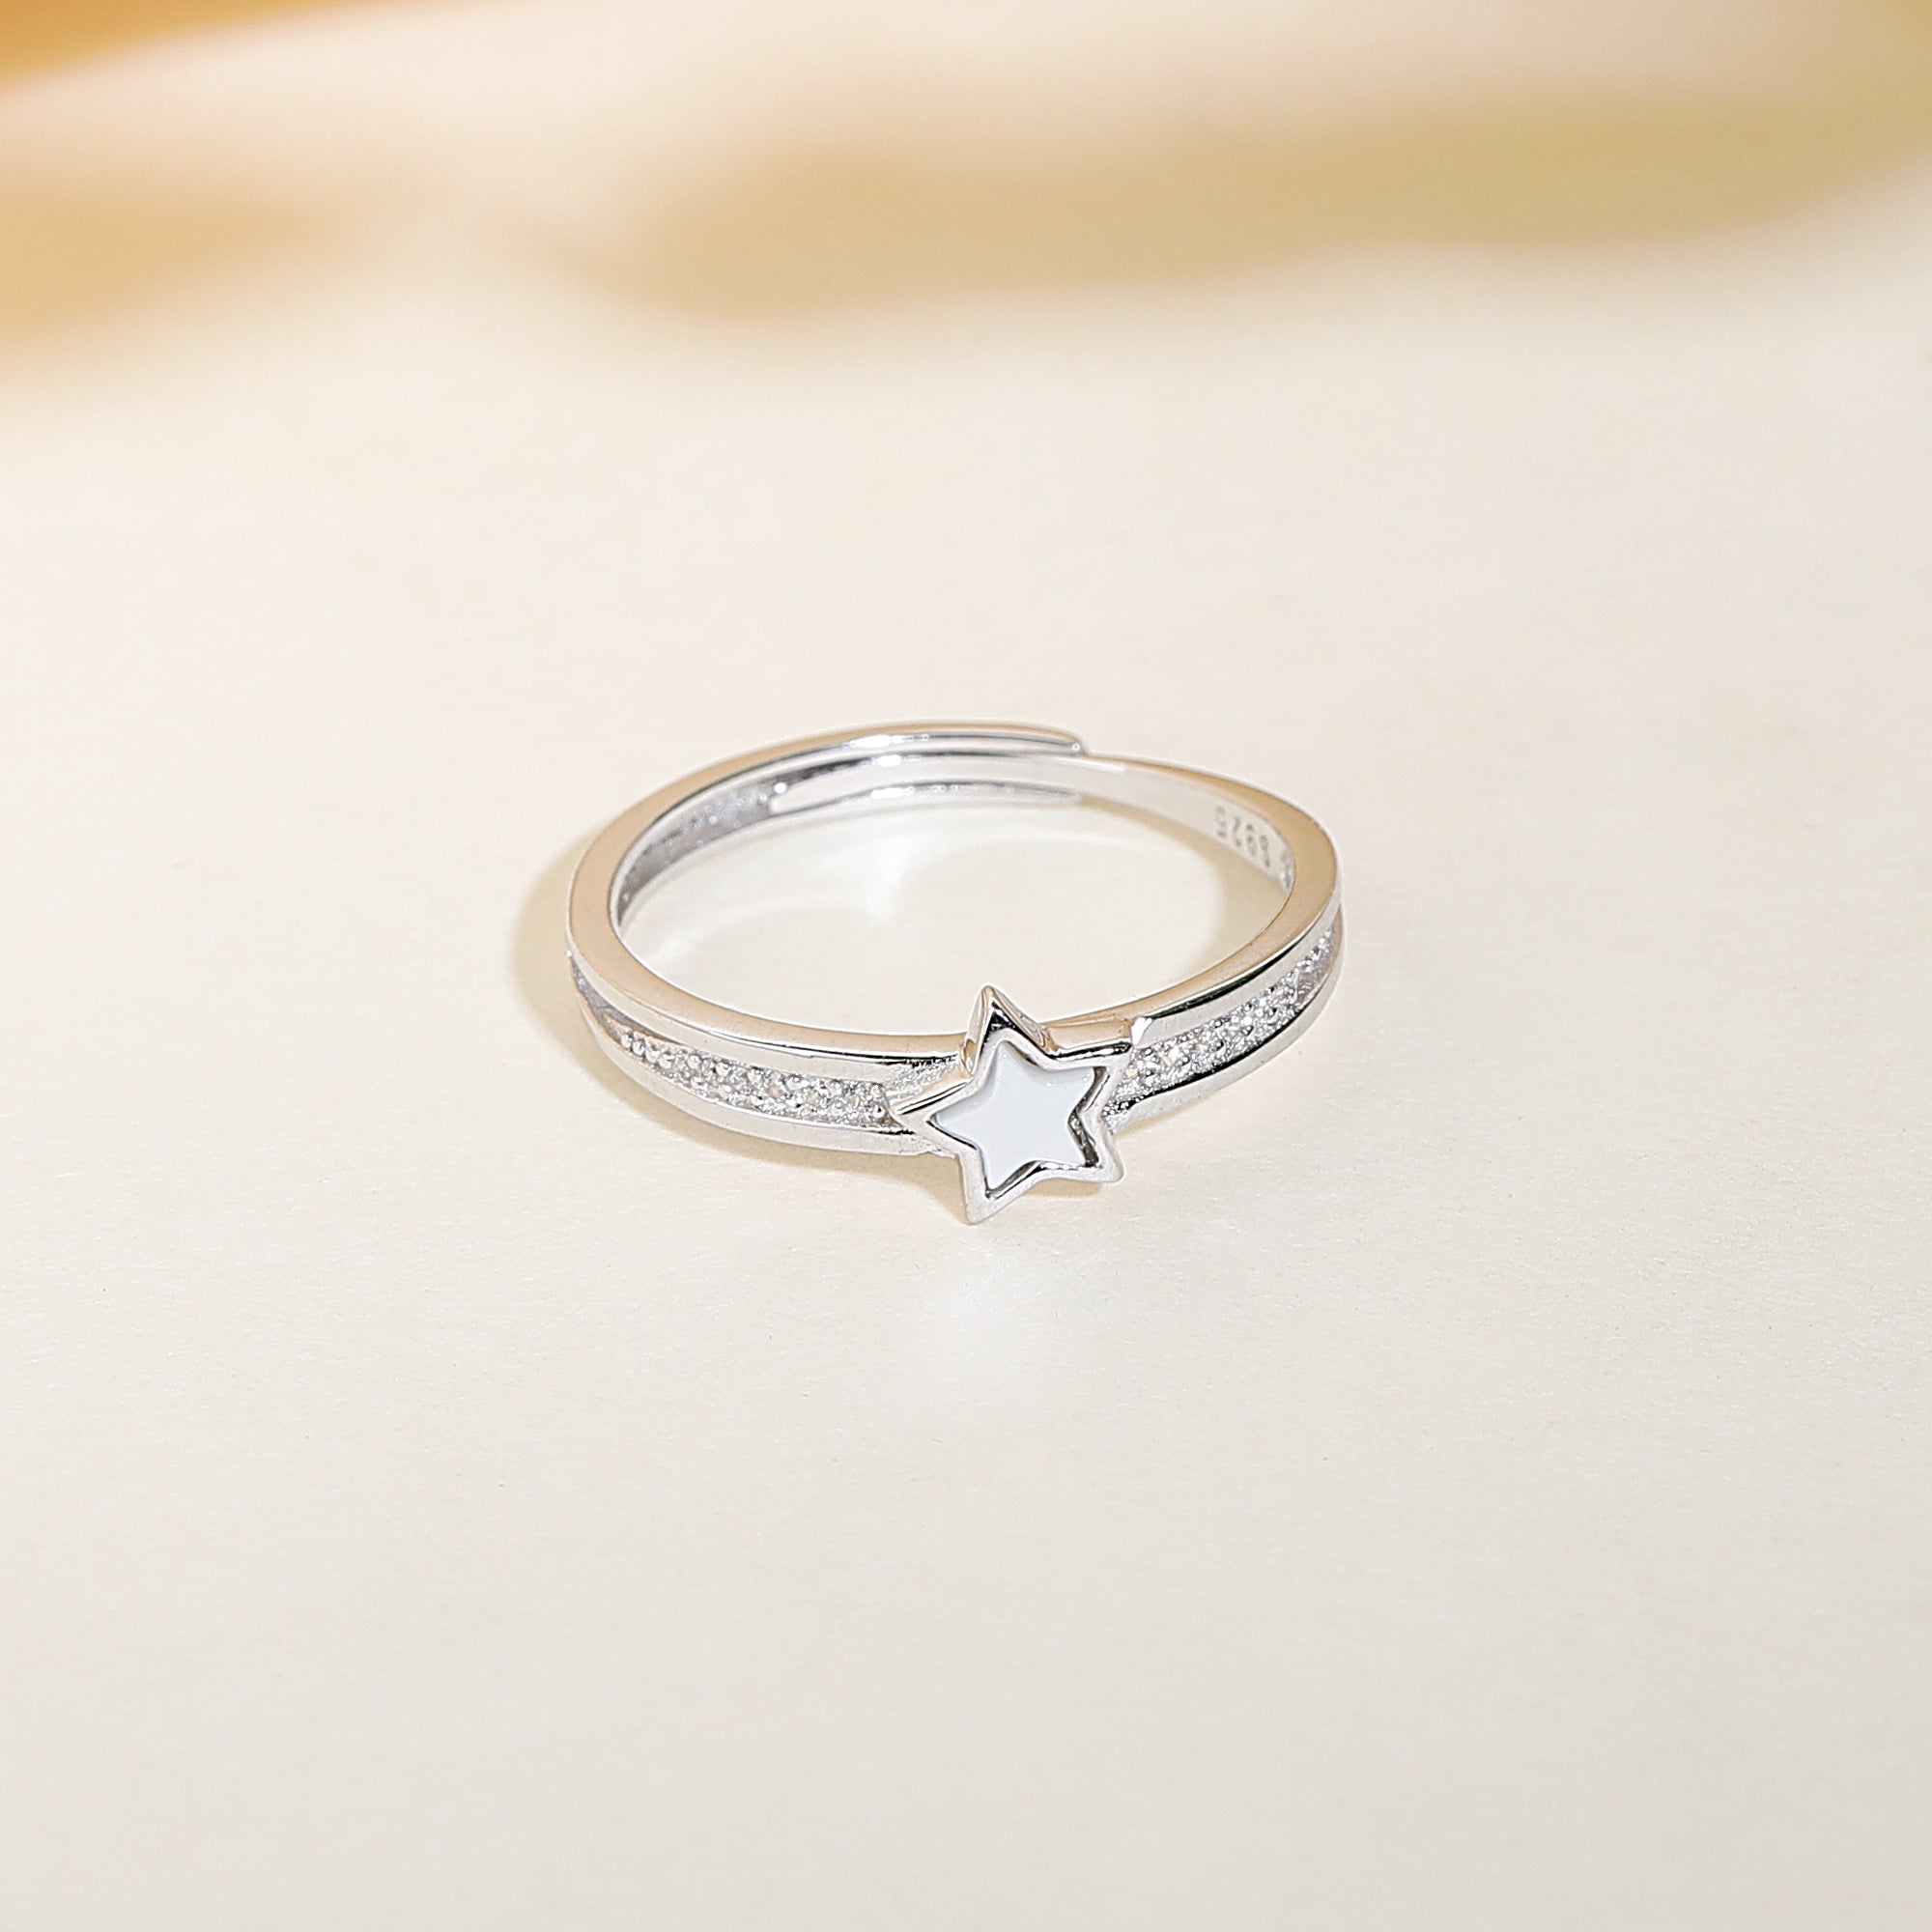 Star ring sterling silver with adjustable size